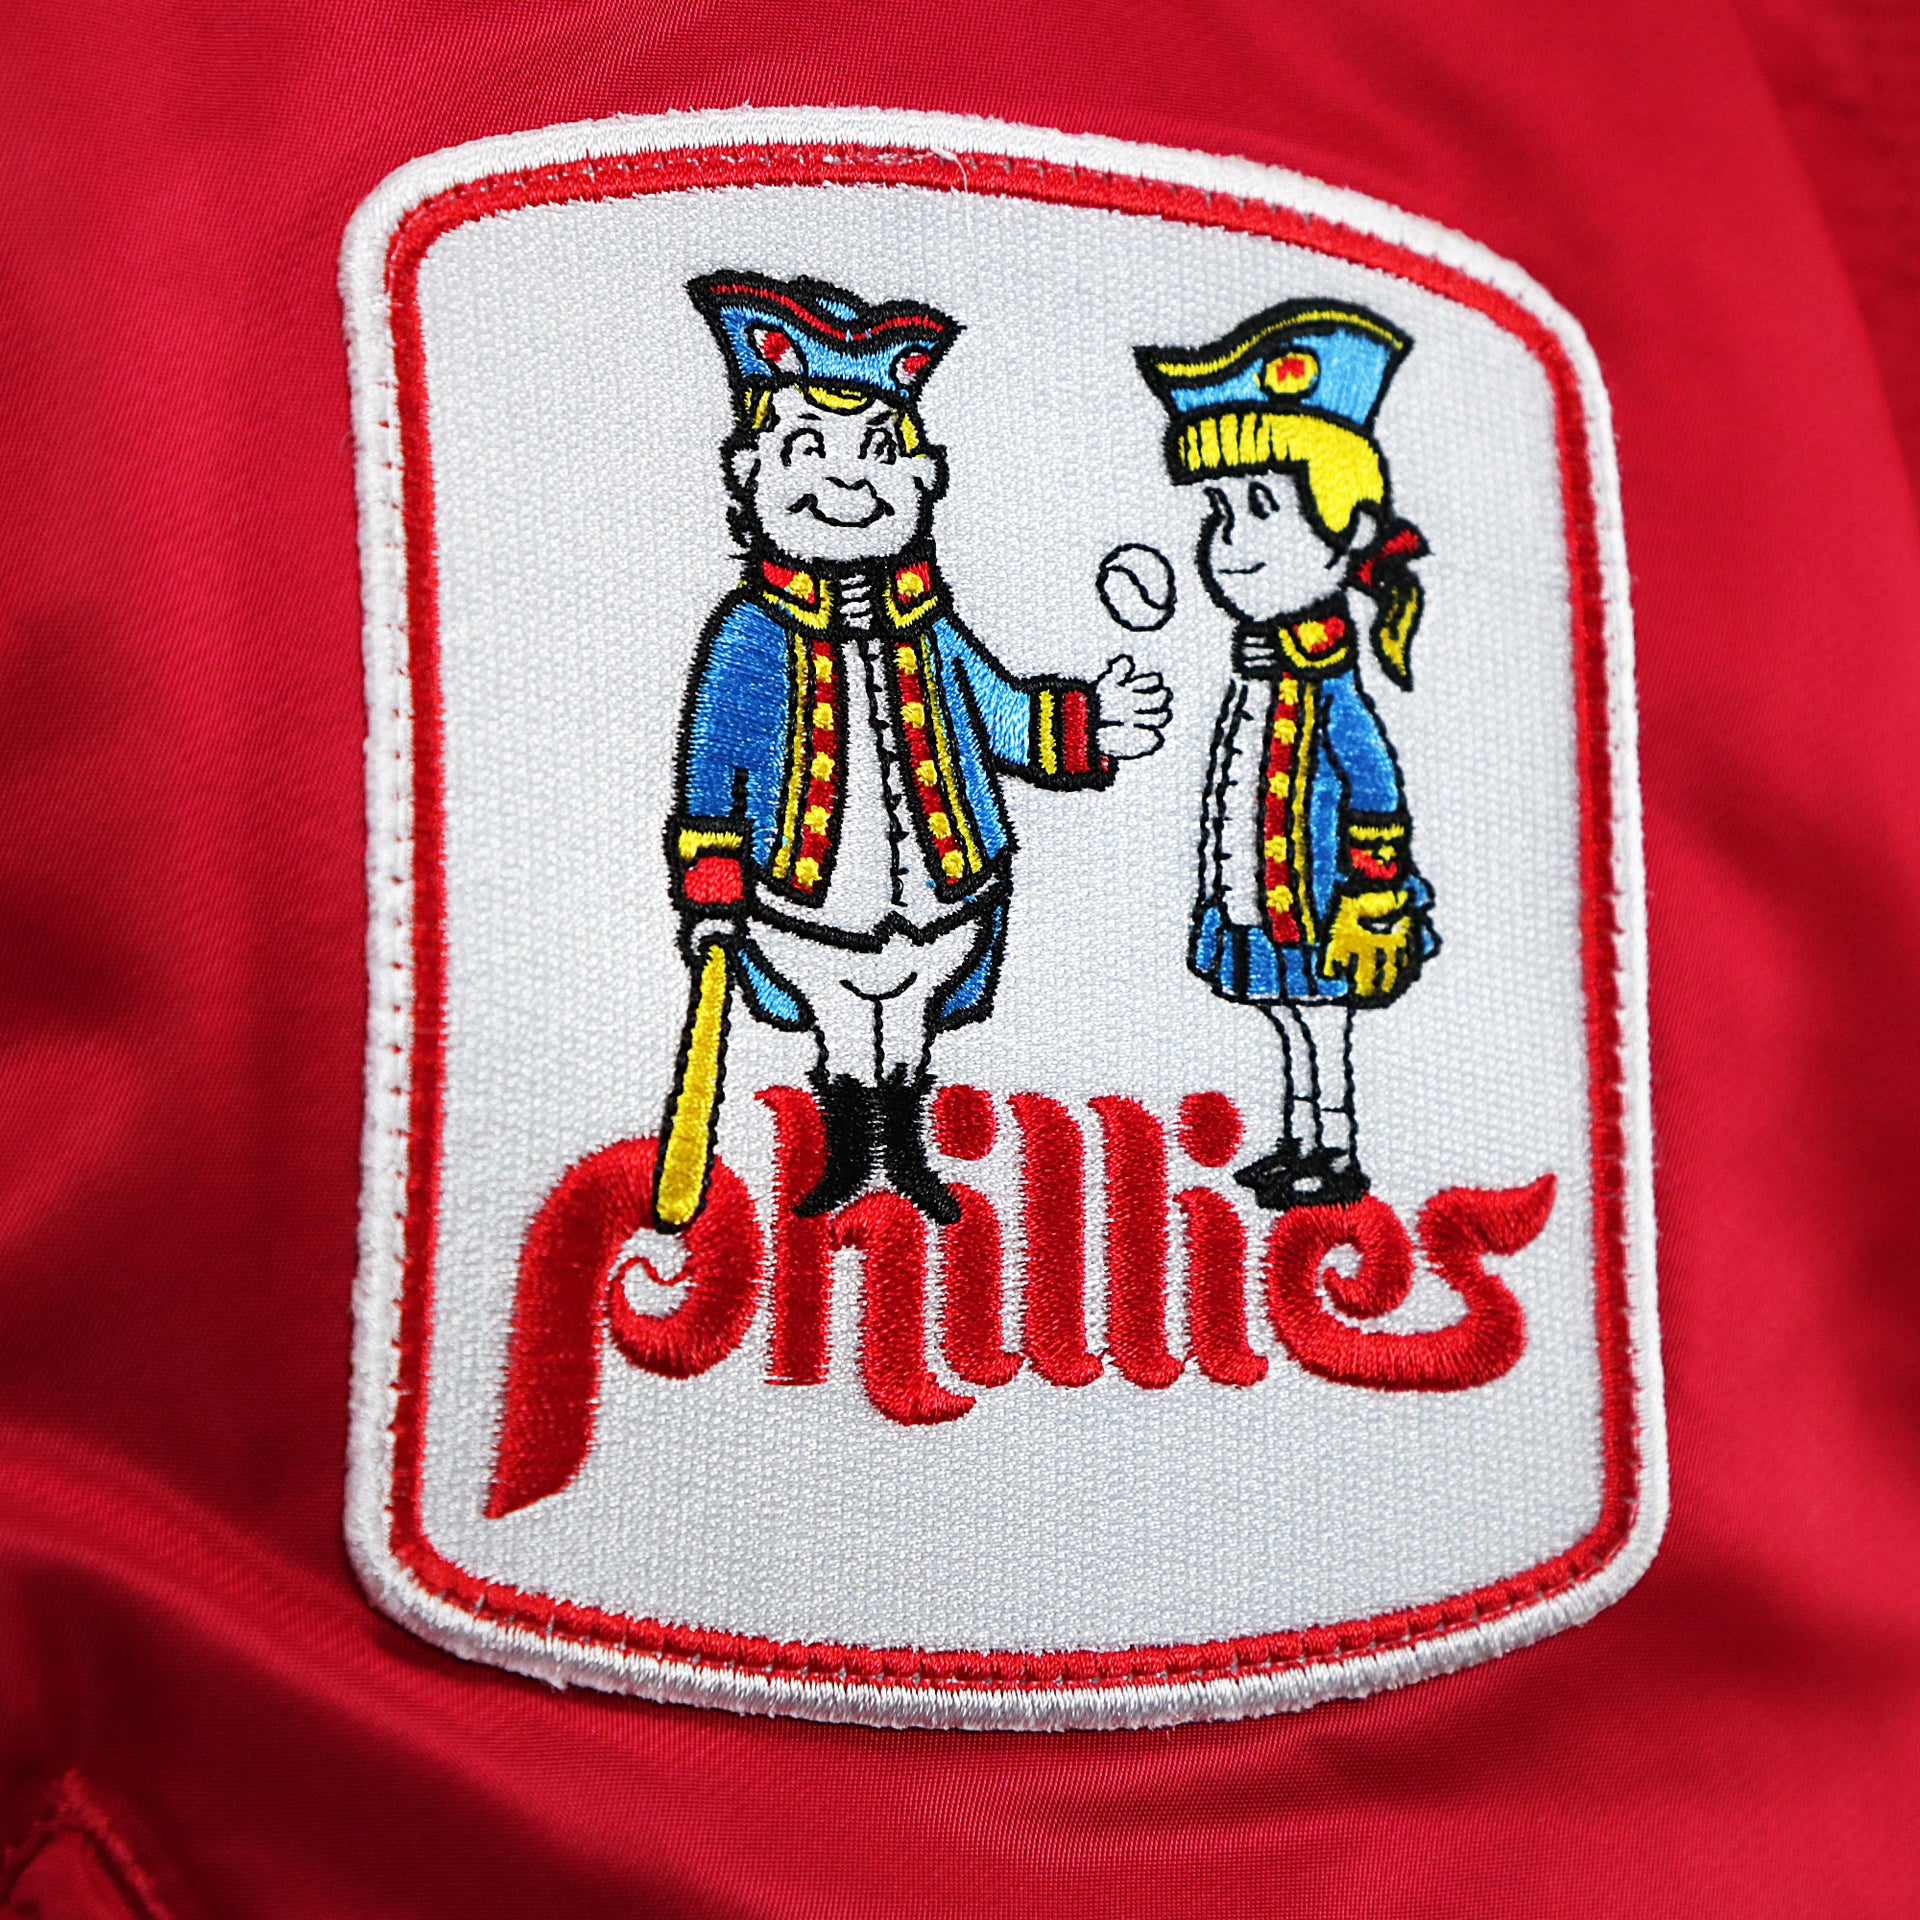 The Phillies Quakers Logo on the Philadelphia Phillies MLB Patch Alpha Industries Reversible Bomber Jacket With Camo Liner | Red Bomber Jacket